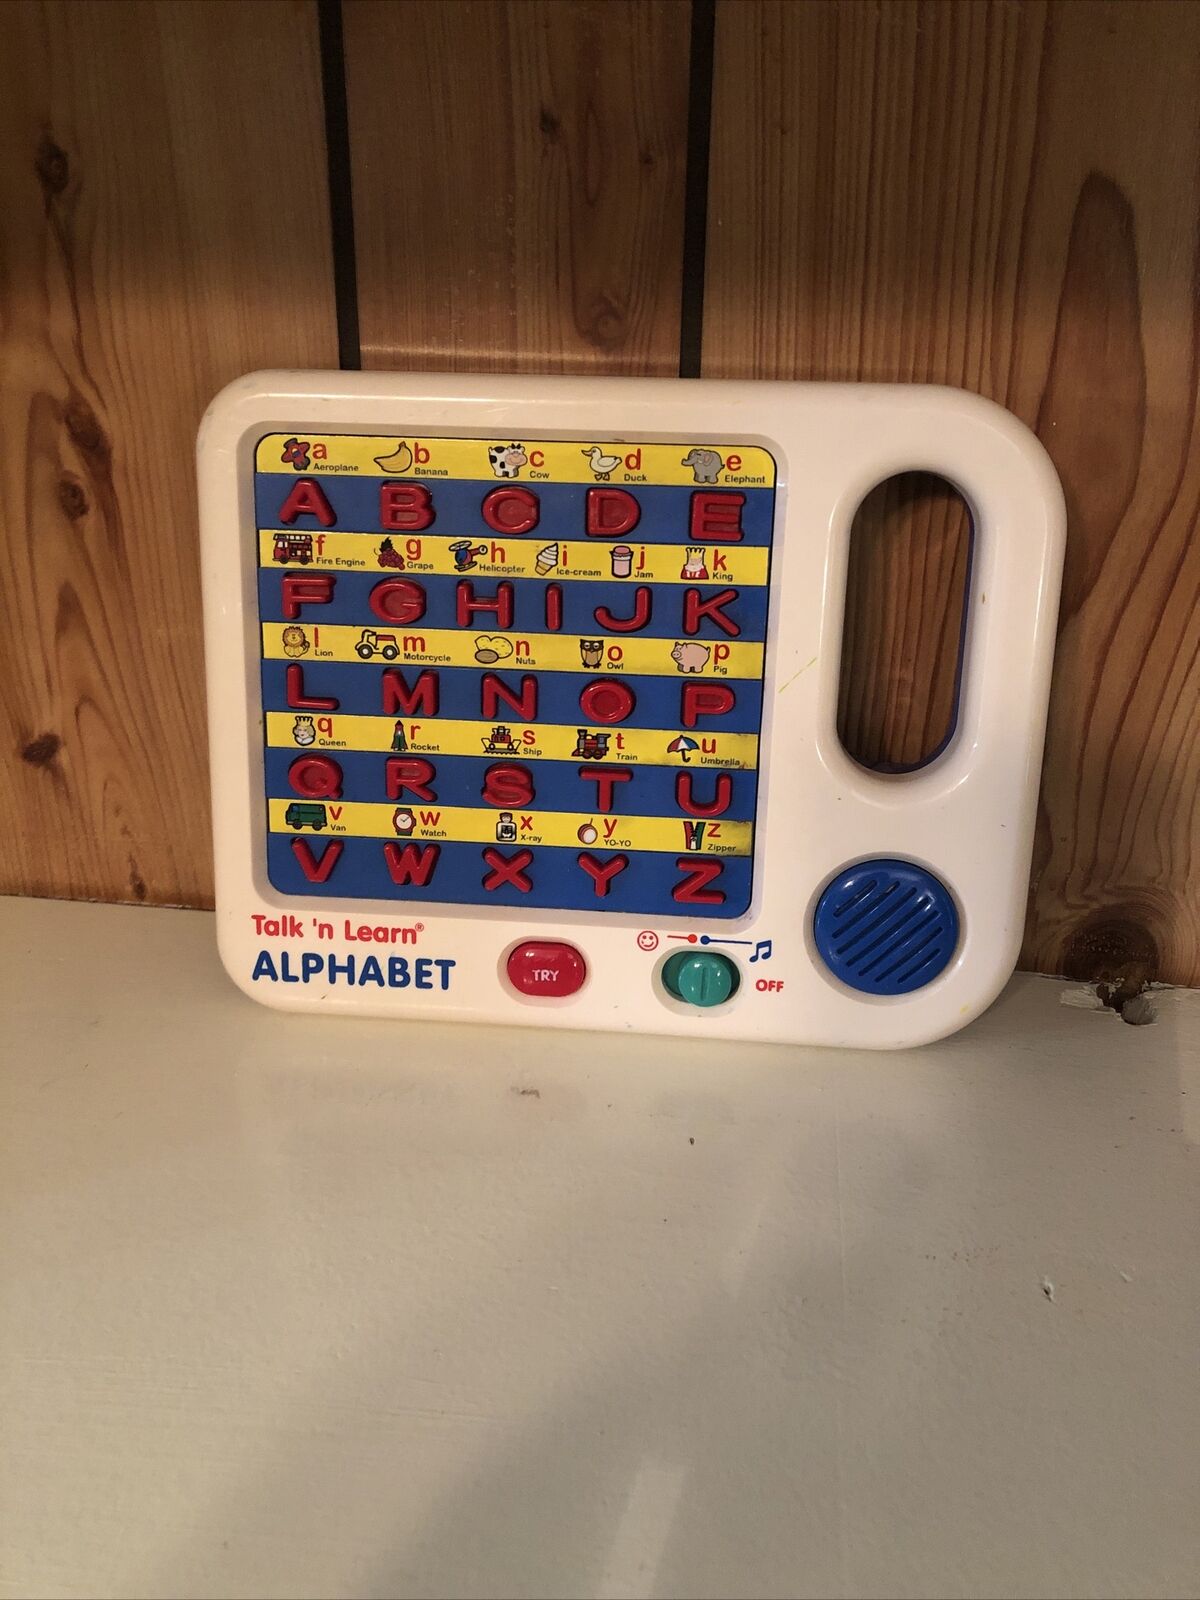 Talk ‘n Learn ALPHABET By Scientific Toys - Child’s Learning Toy Purple Vintage